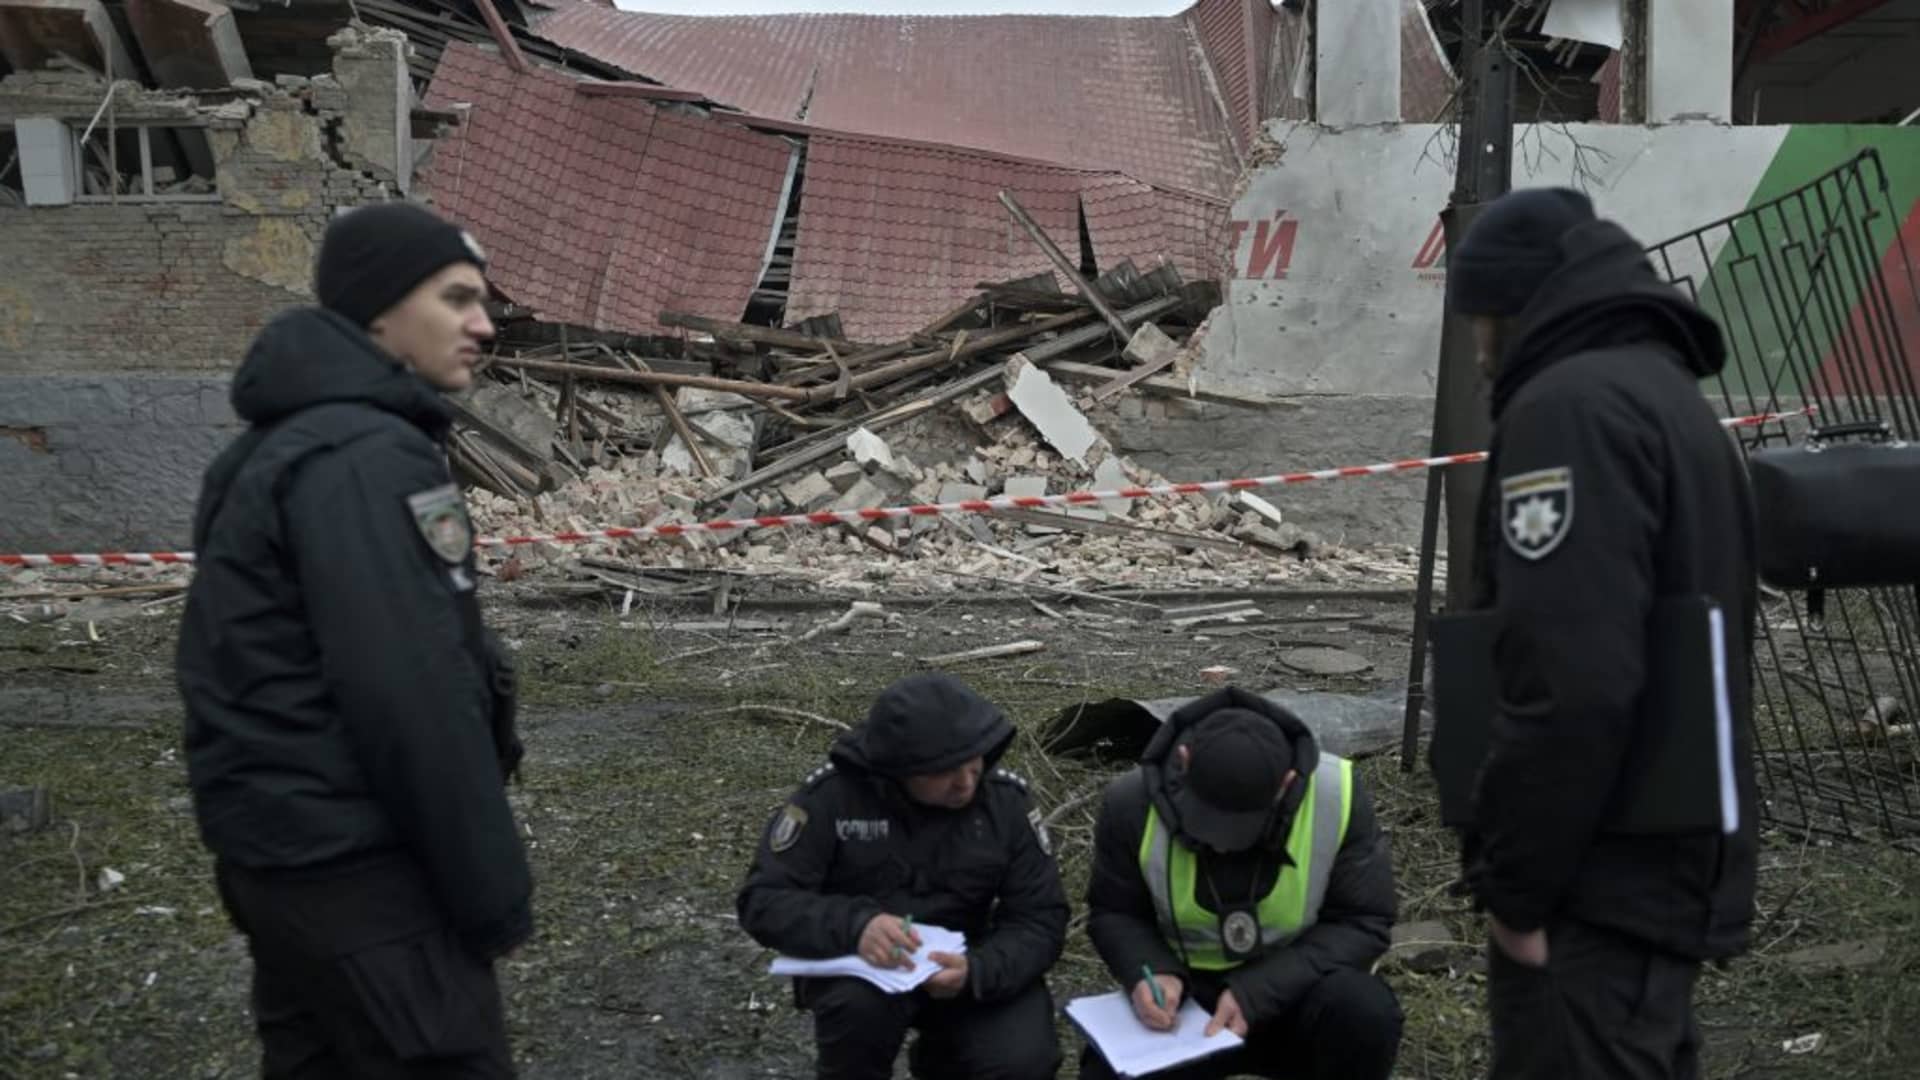 Law enforcement officers work at the site of a missile attack in Kyiv on January 23, 2024. Dozens of people were injured and two killed following strikes on the Ukrainian capital Kyiv and the second-largest city Kharkiv, officials said on January 23, 2024. (Photo by Genya SAVILOV / AFP) (Photo by GENYA SAVILOV/AFP via Getty Images)